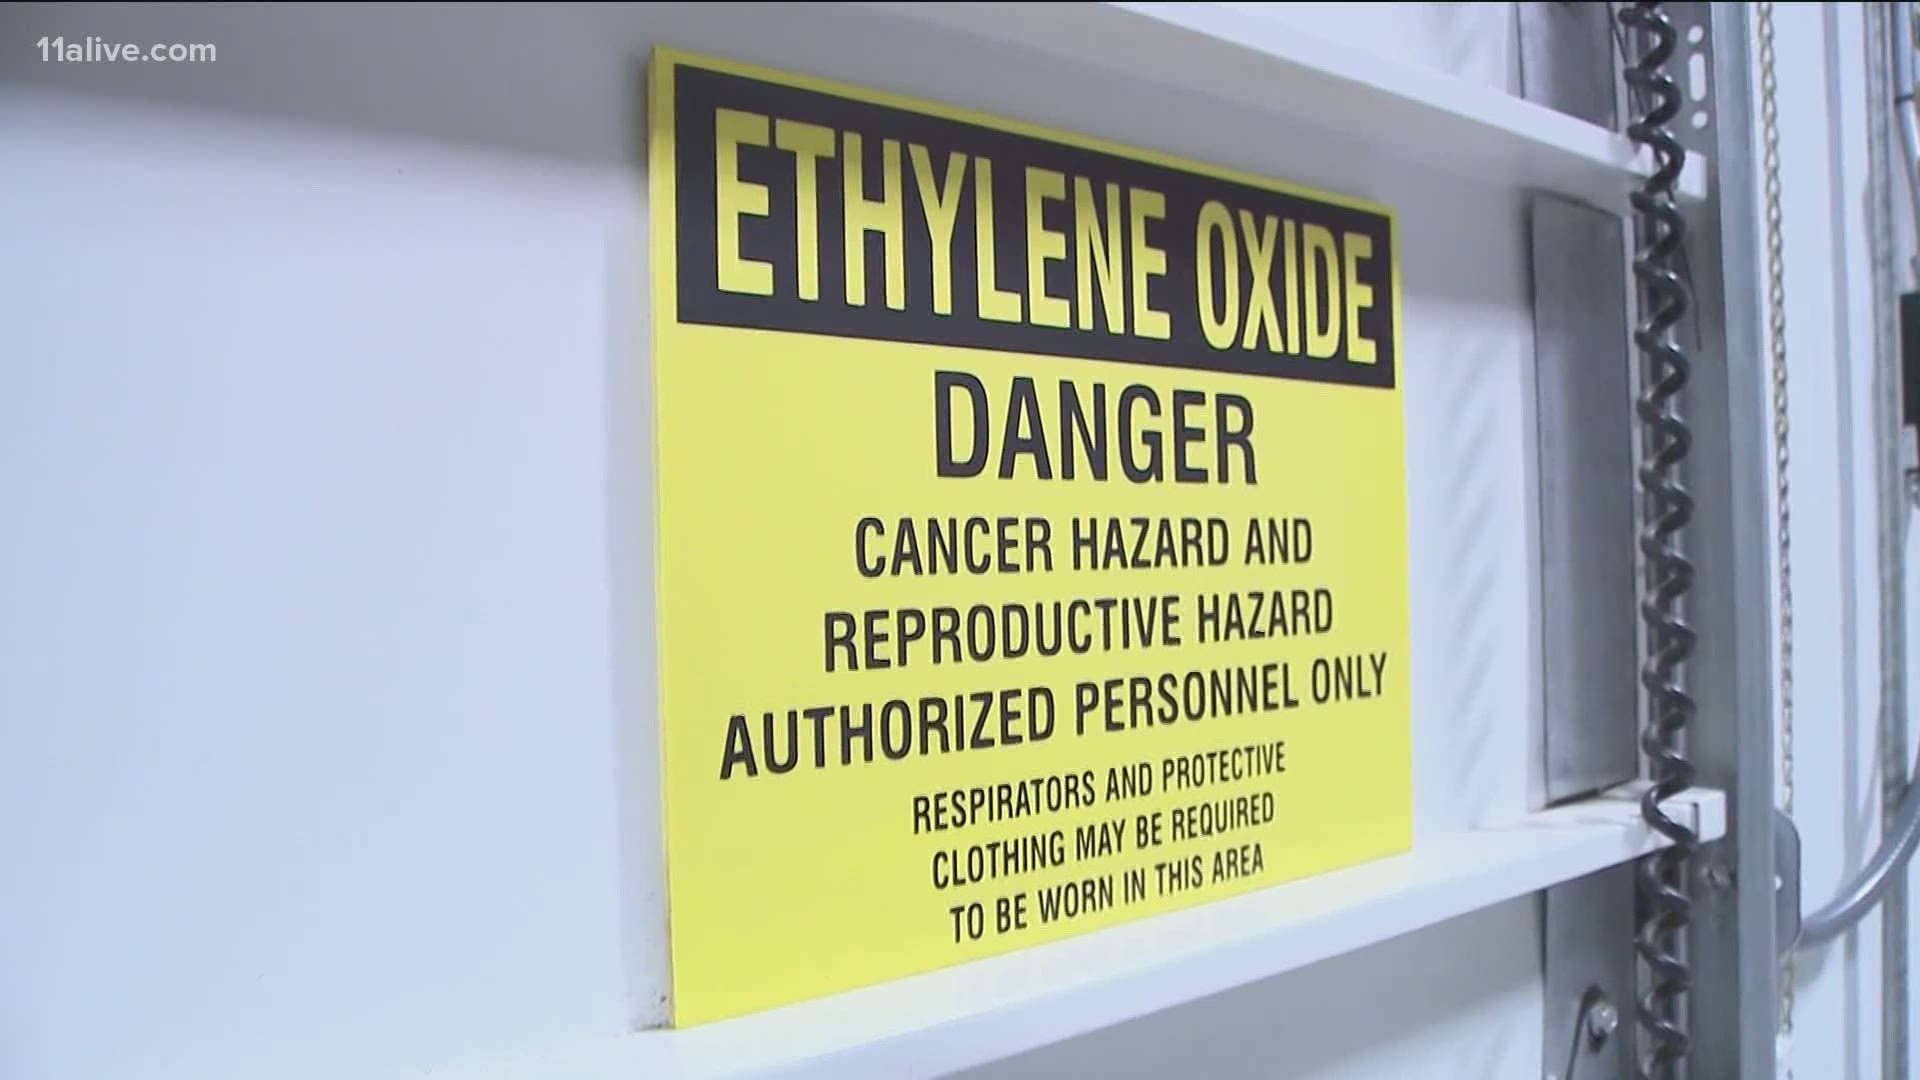 The lawsuits claim the companies’ use of the gas, ethylene oxide, has contributed to a rise in cancer.